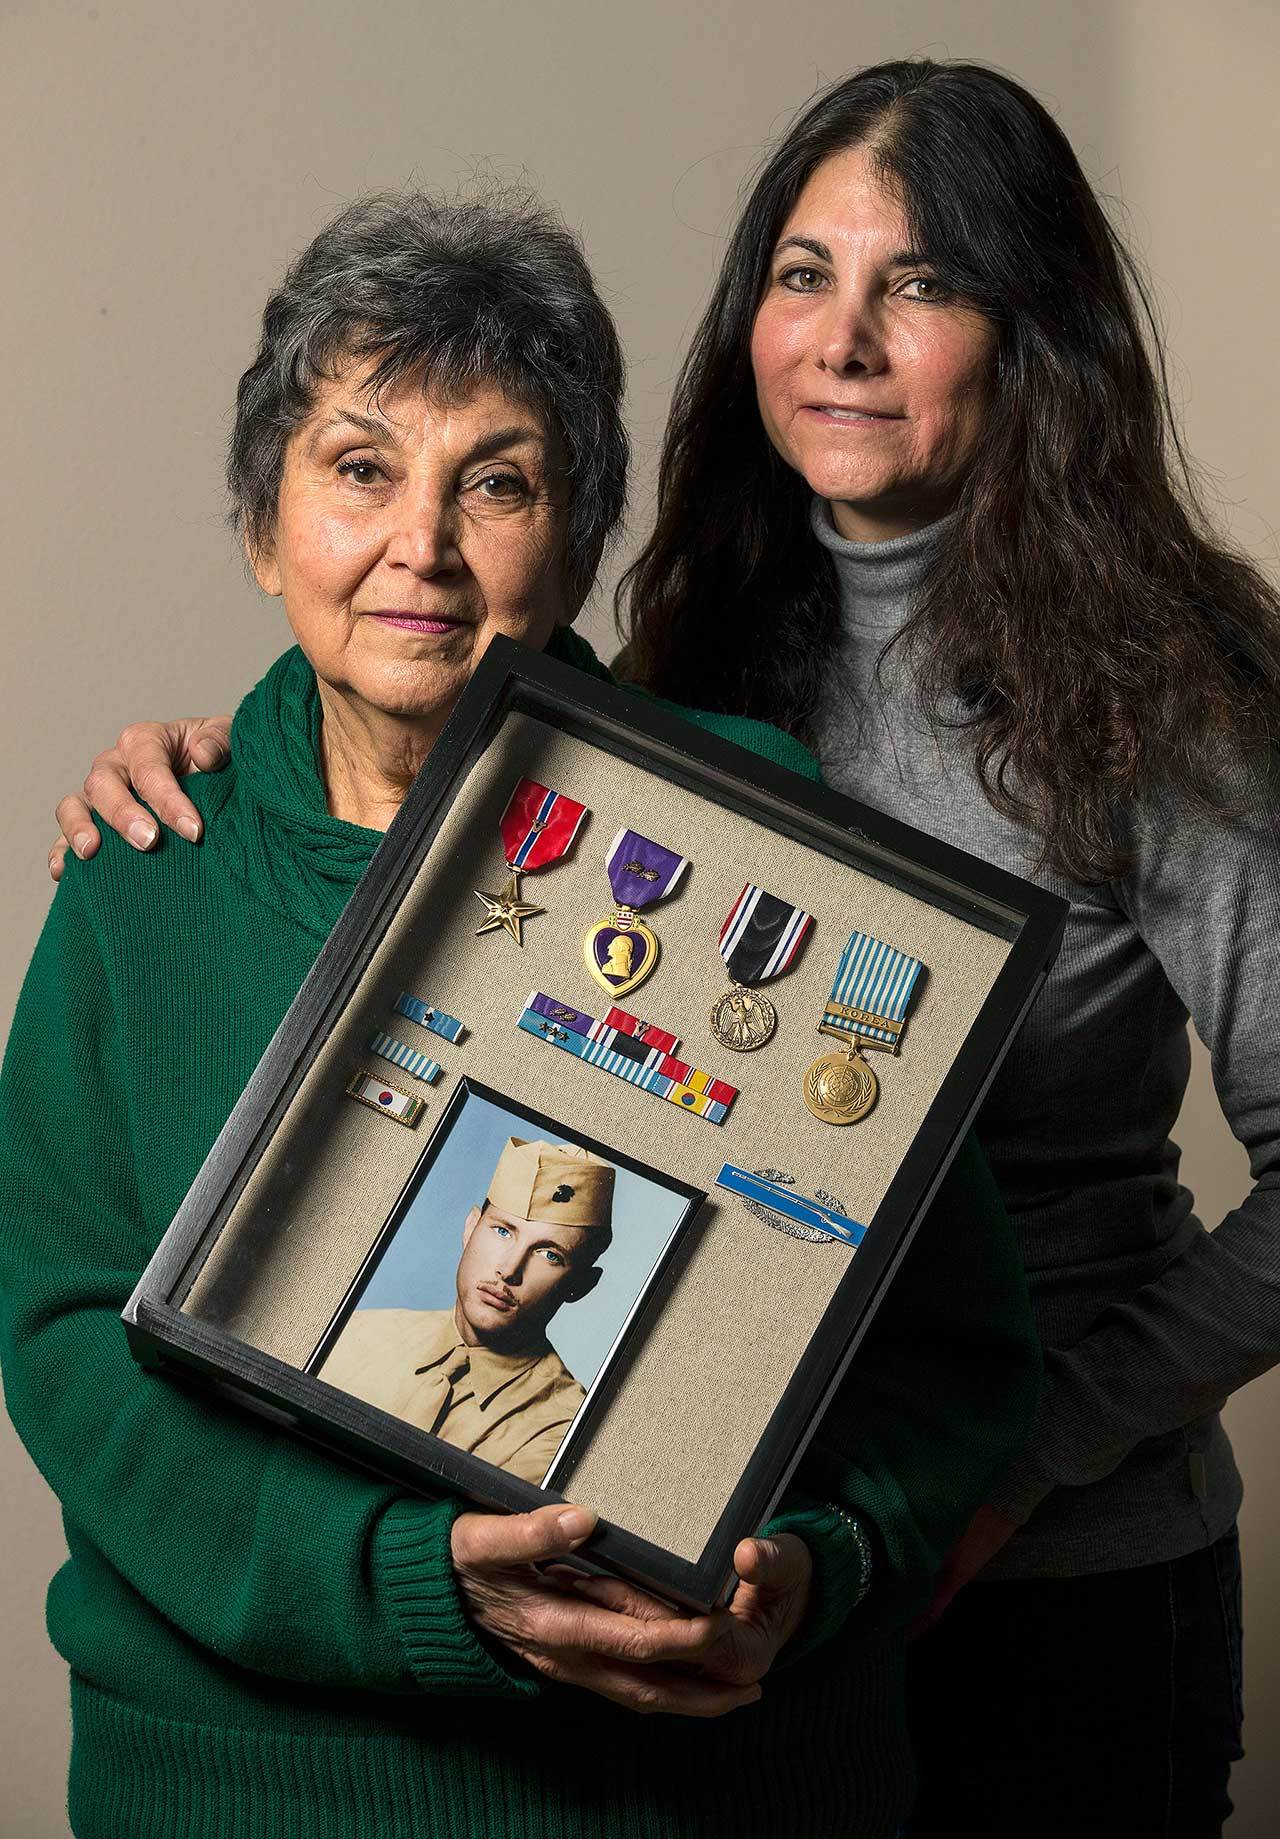 With her daughter Valerie Rocha, Shirley Nordin holds a shadowbox containing medals and a photo of her brother-in-law and Korean War Army Cpl. David T. Nordin, Jr., whose remains were recently identified, at her home on Thursday, Dec. 15, in Lynnwood. Nordin and her daughter will attend a funeral for her brother-in-law on Friday. (Andy Bronson / The Herald)